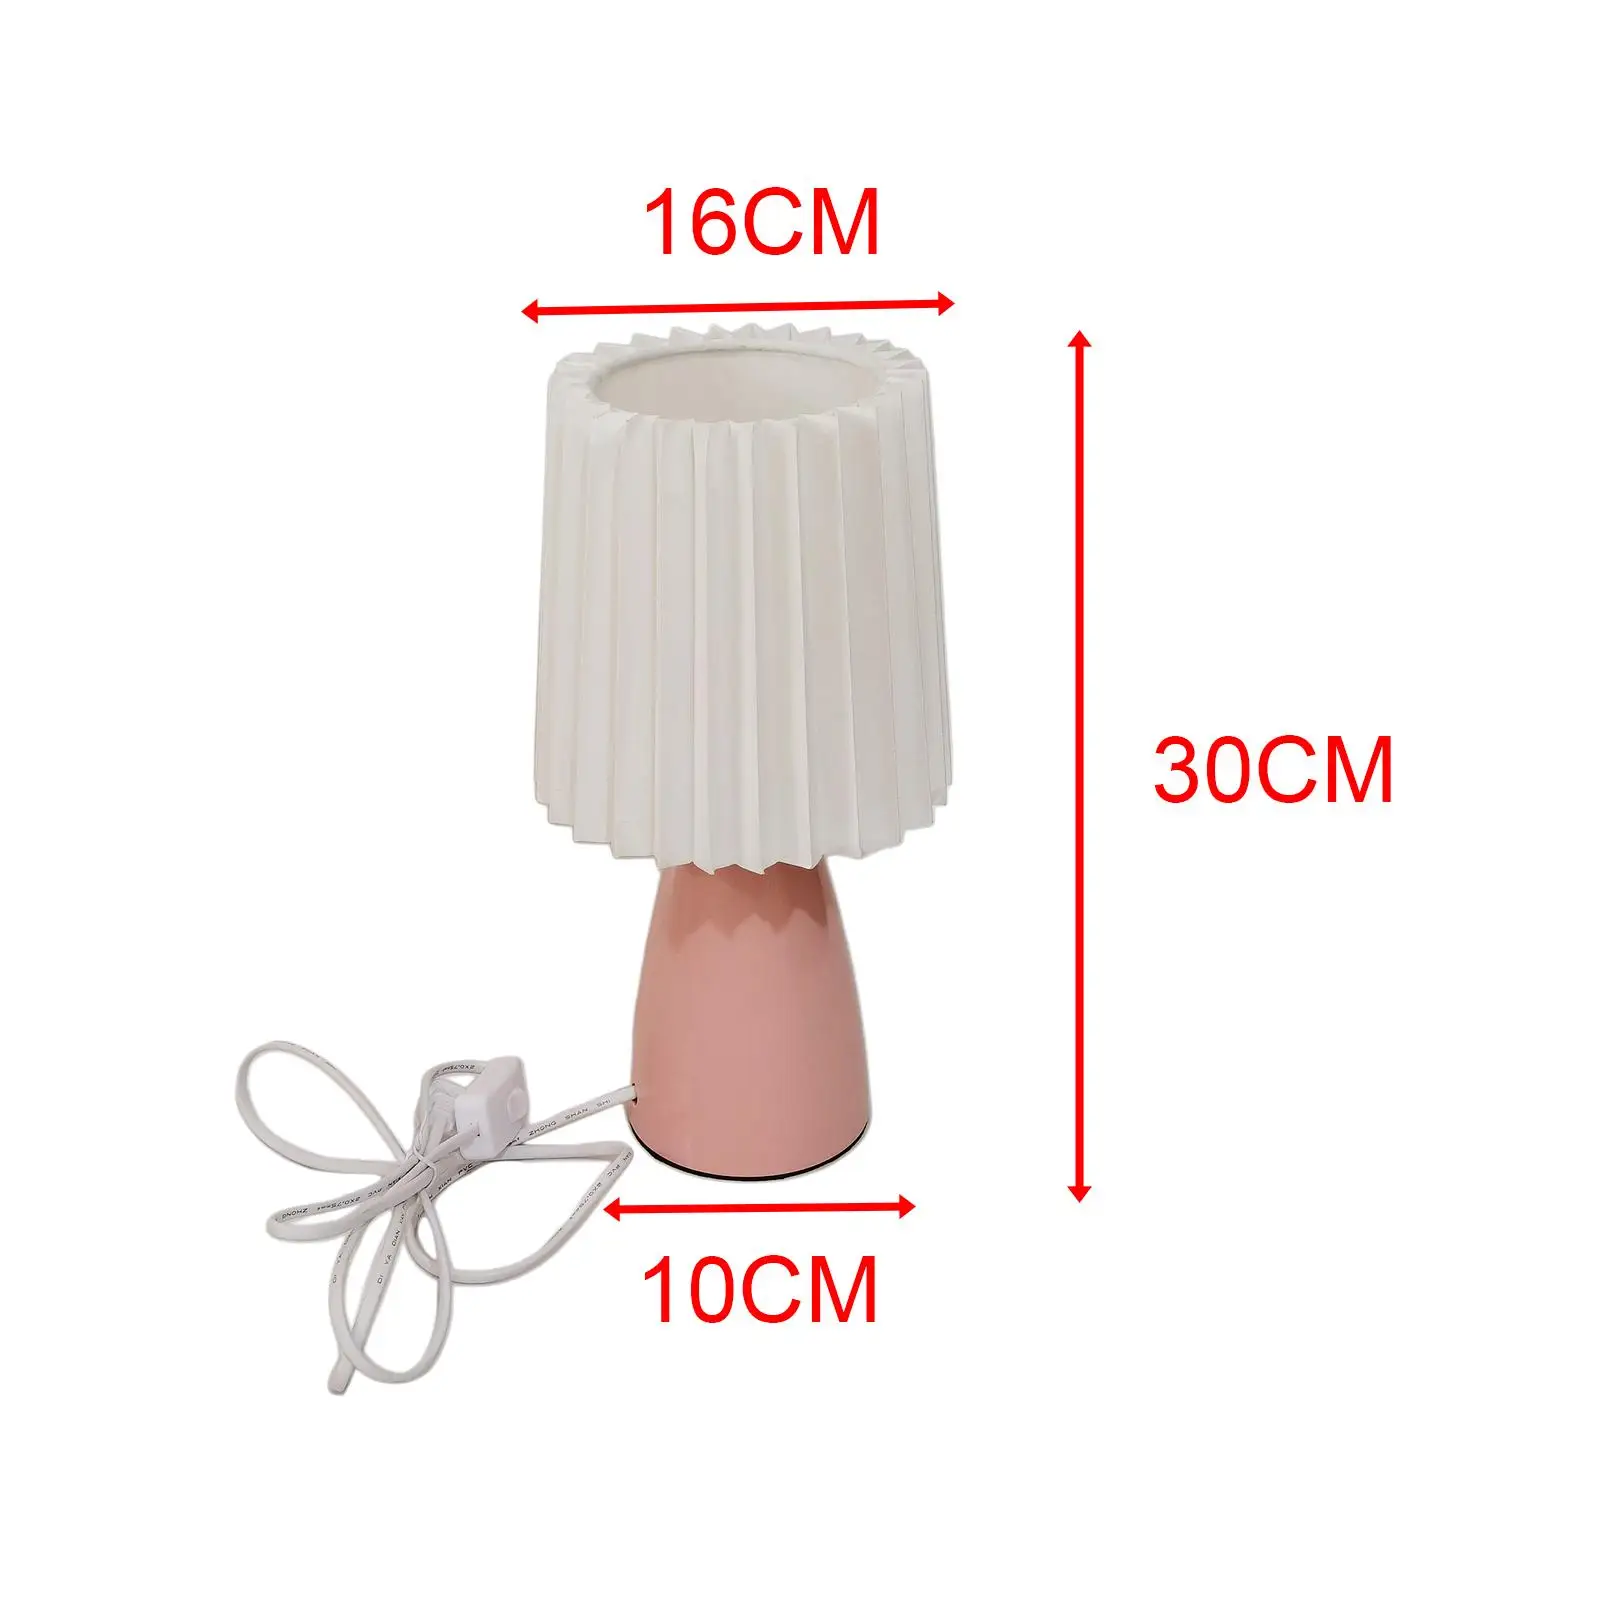 Pleated Table Lamp Modern Small Night Lamp with Switch Desk Lamp for Home Office Small Space Study Dorm Bulb Not Included